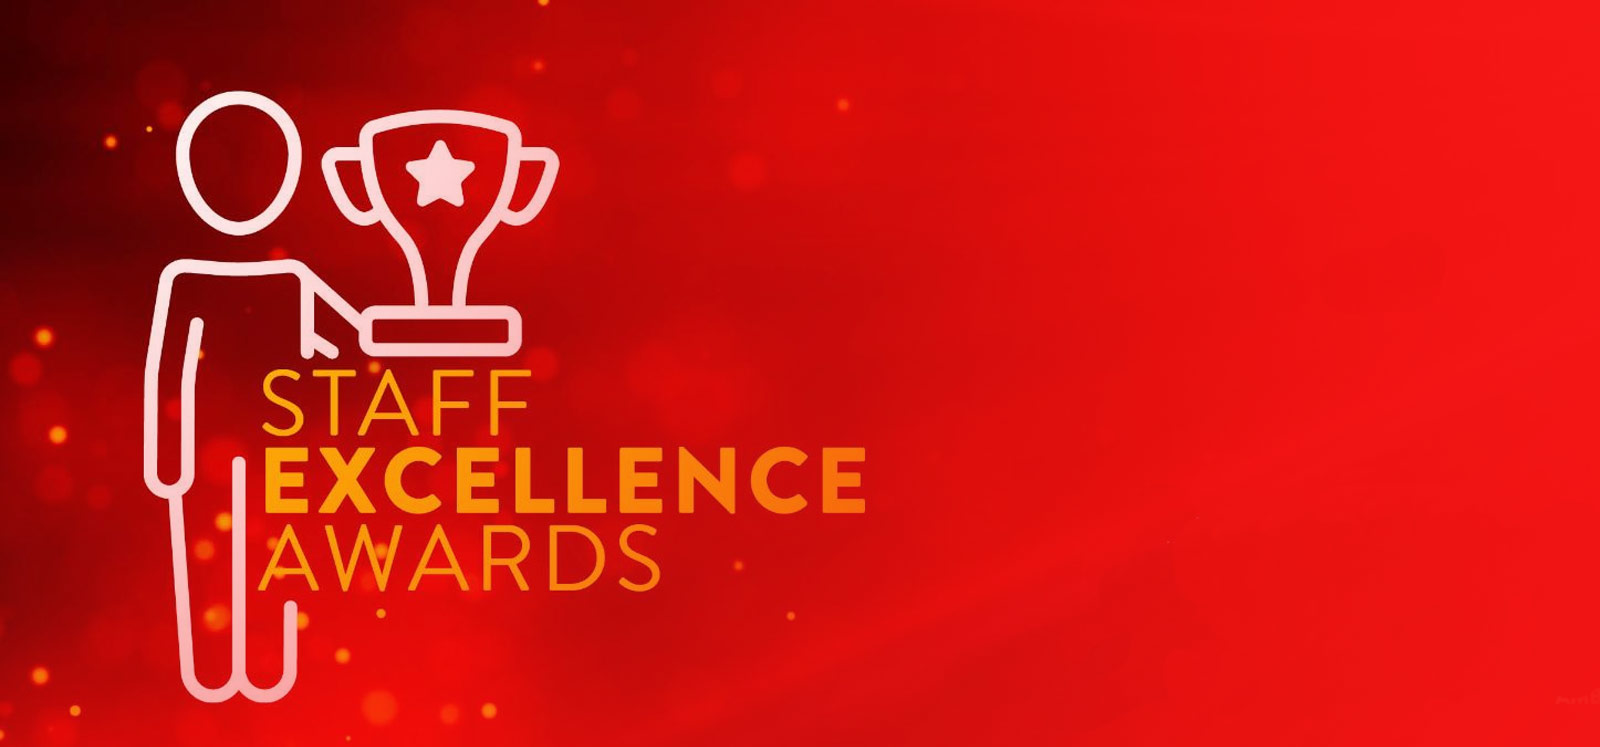 Illustration outline of a person holding a trophy above the text 'Staff Excellence Awards'